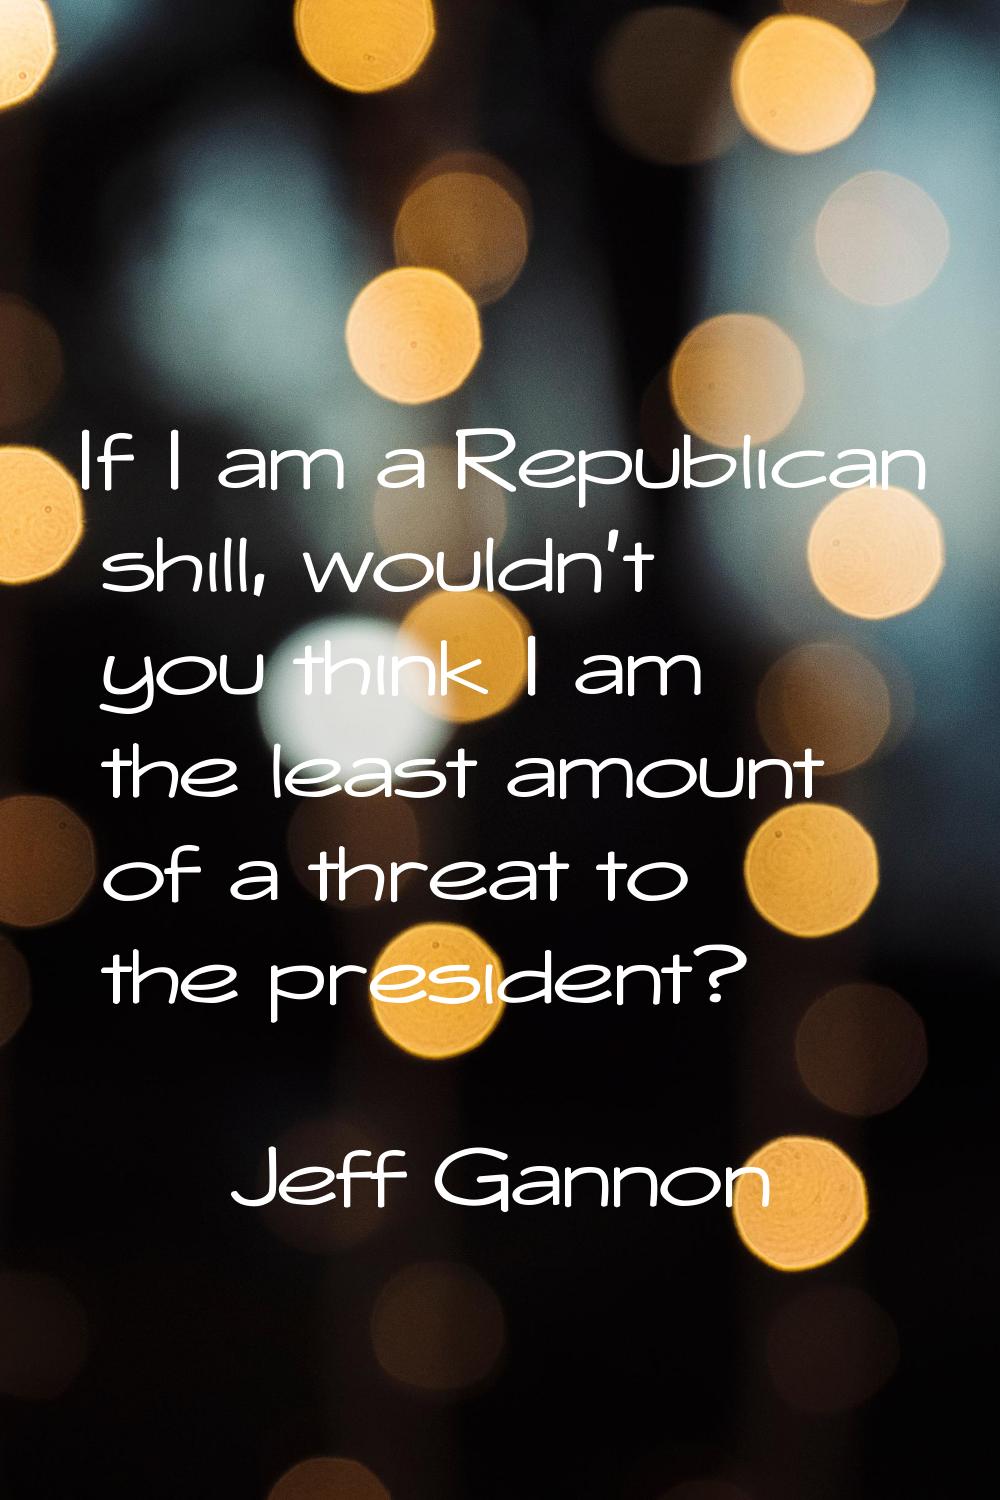 If I am a Republican shill, wouldn't you think I am the least amount of a threat to the president?